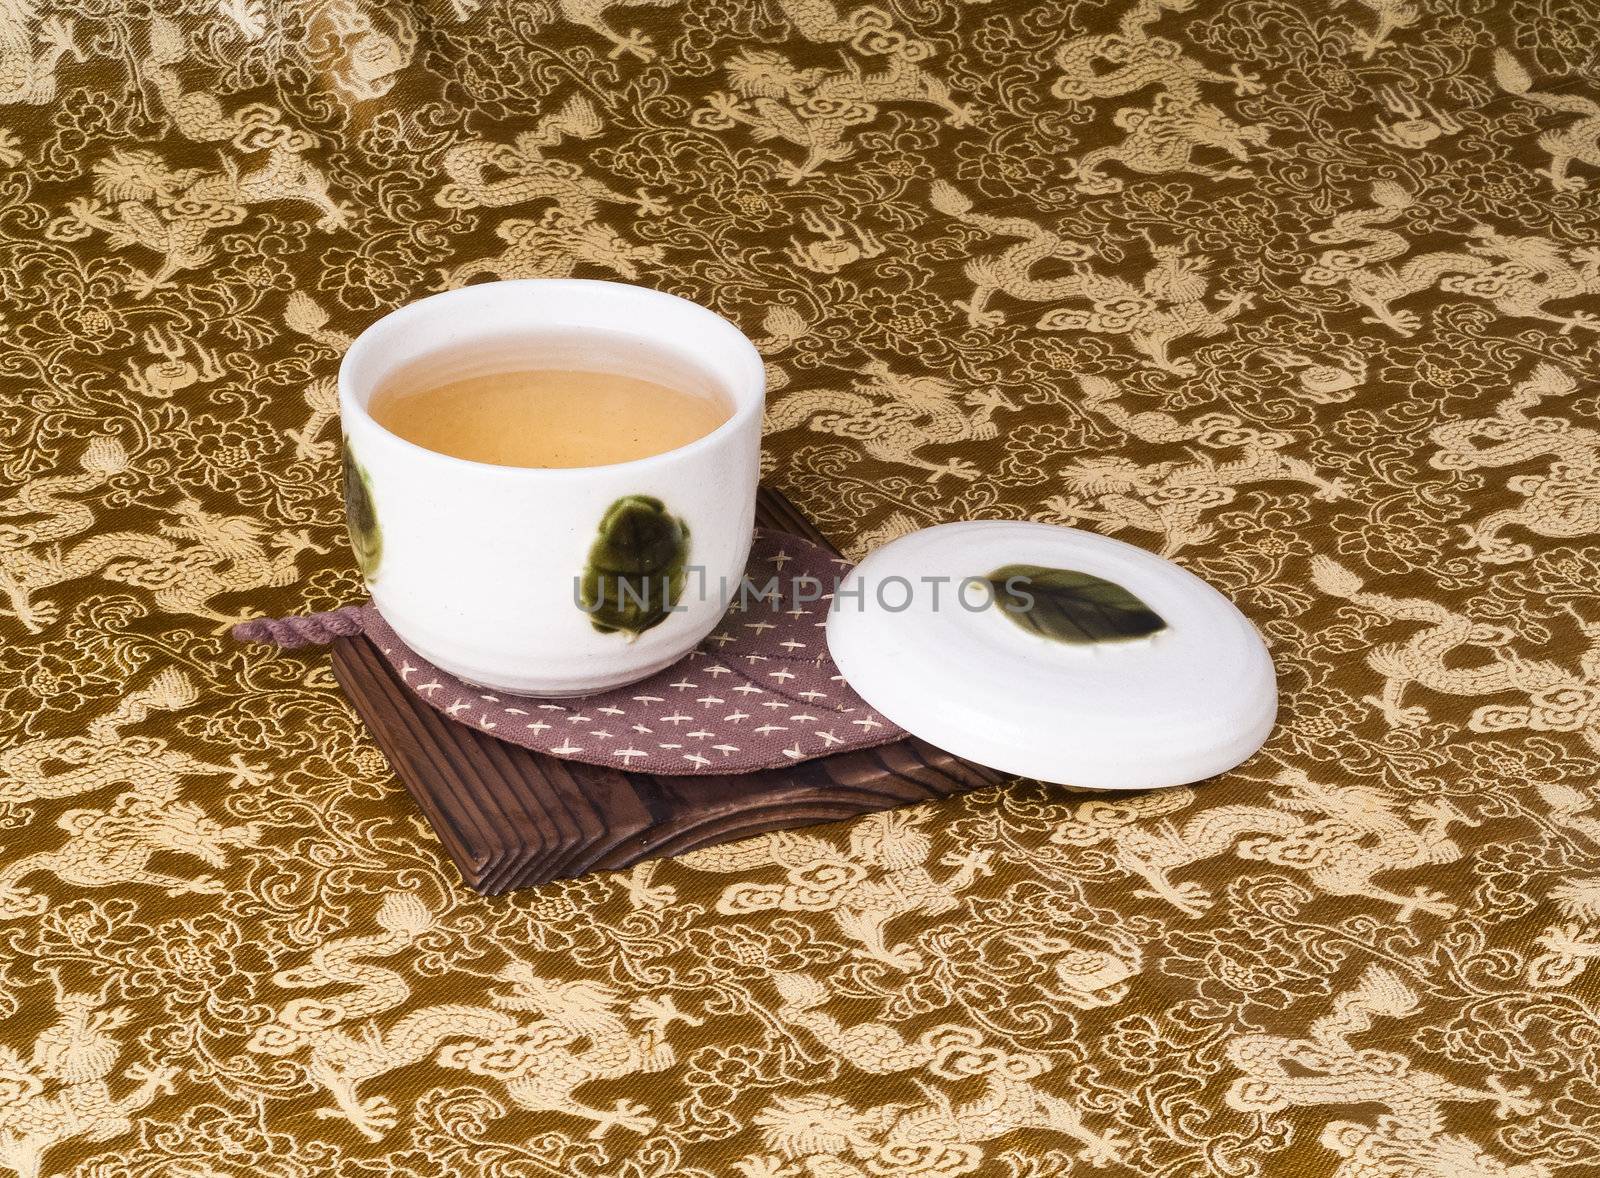 green tea set with background